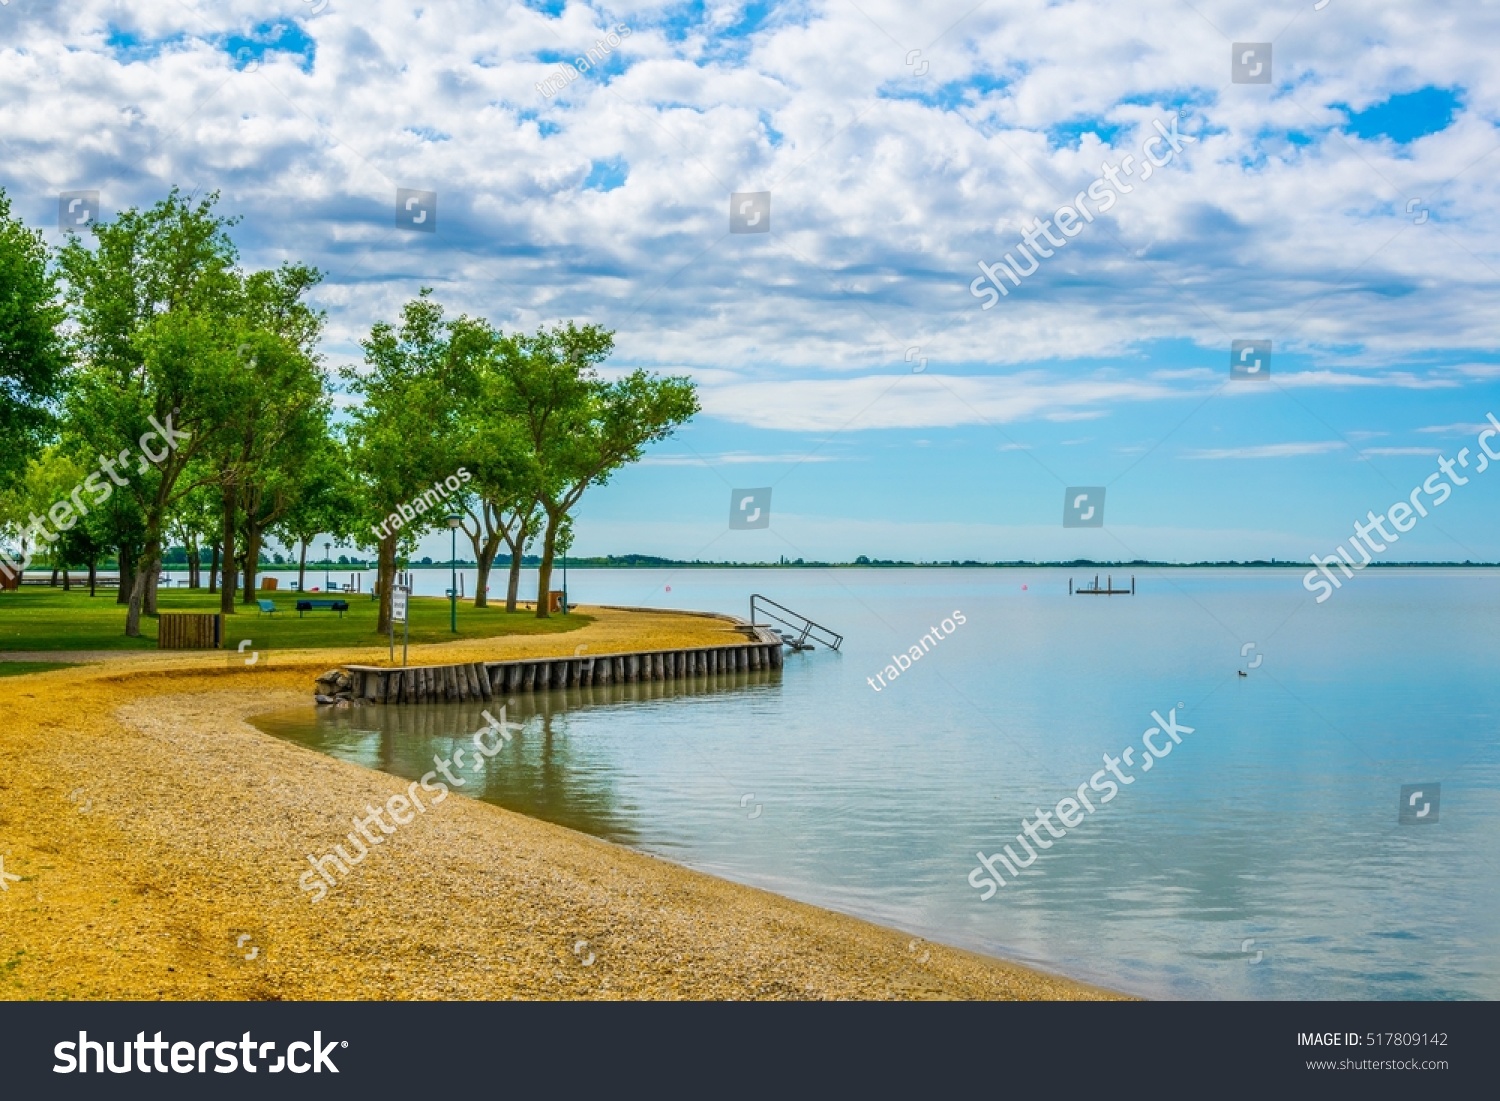 maintained part of shore of the neusiedler see in Austria #517809142